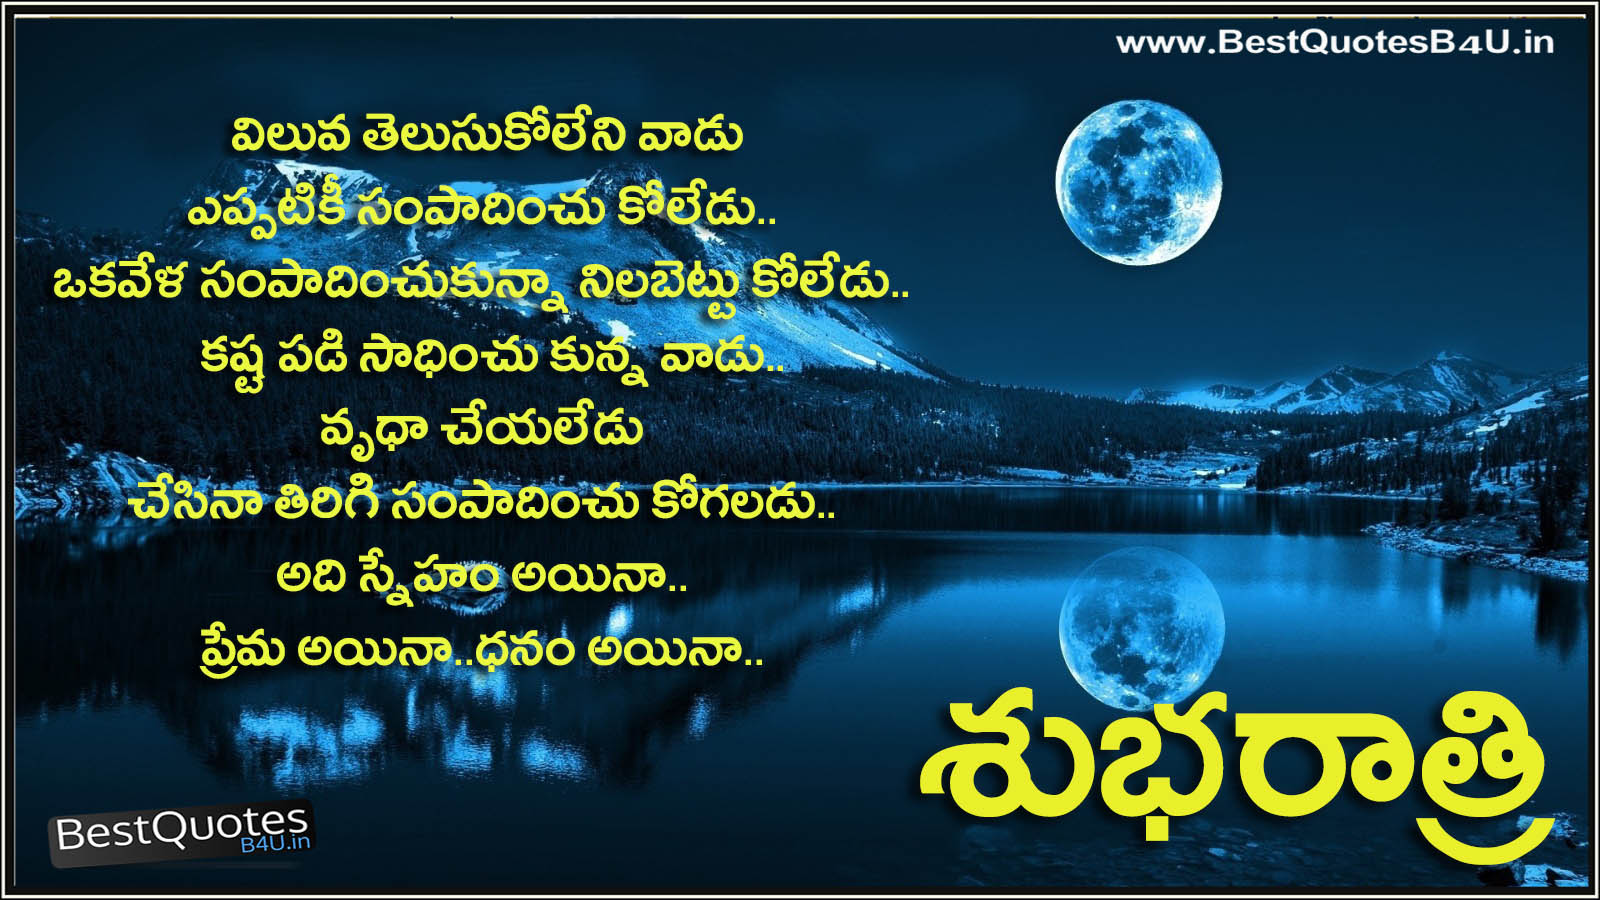 Good night Telugu Quotes with nice wallpapers | Like Share Follow